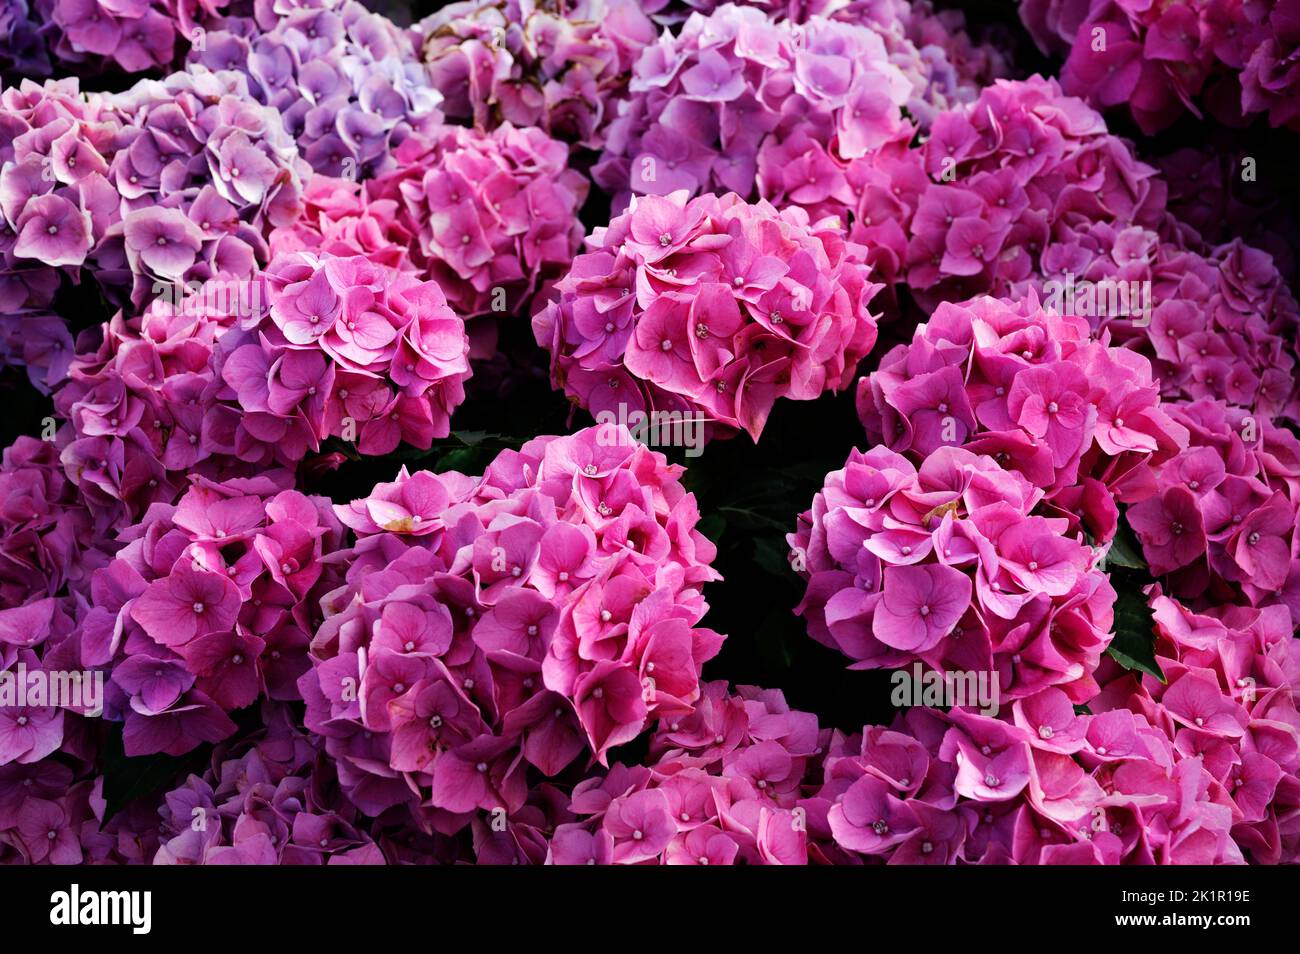 Wales, Pembrokeshire. St Ishmaels garden centre. Pink hydrangeas for sale. Stock Photo